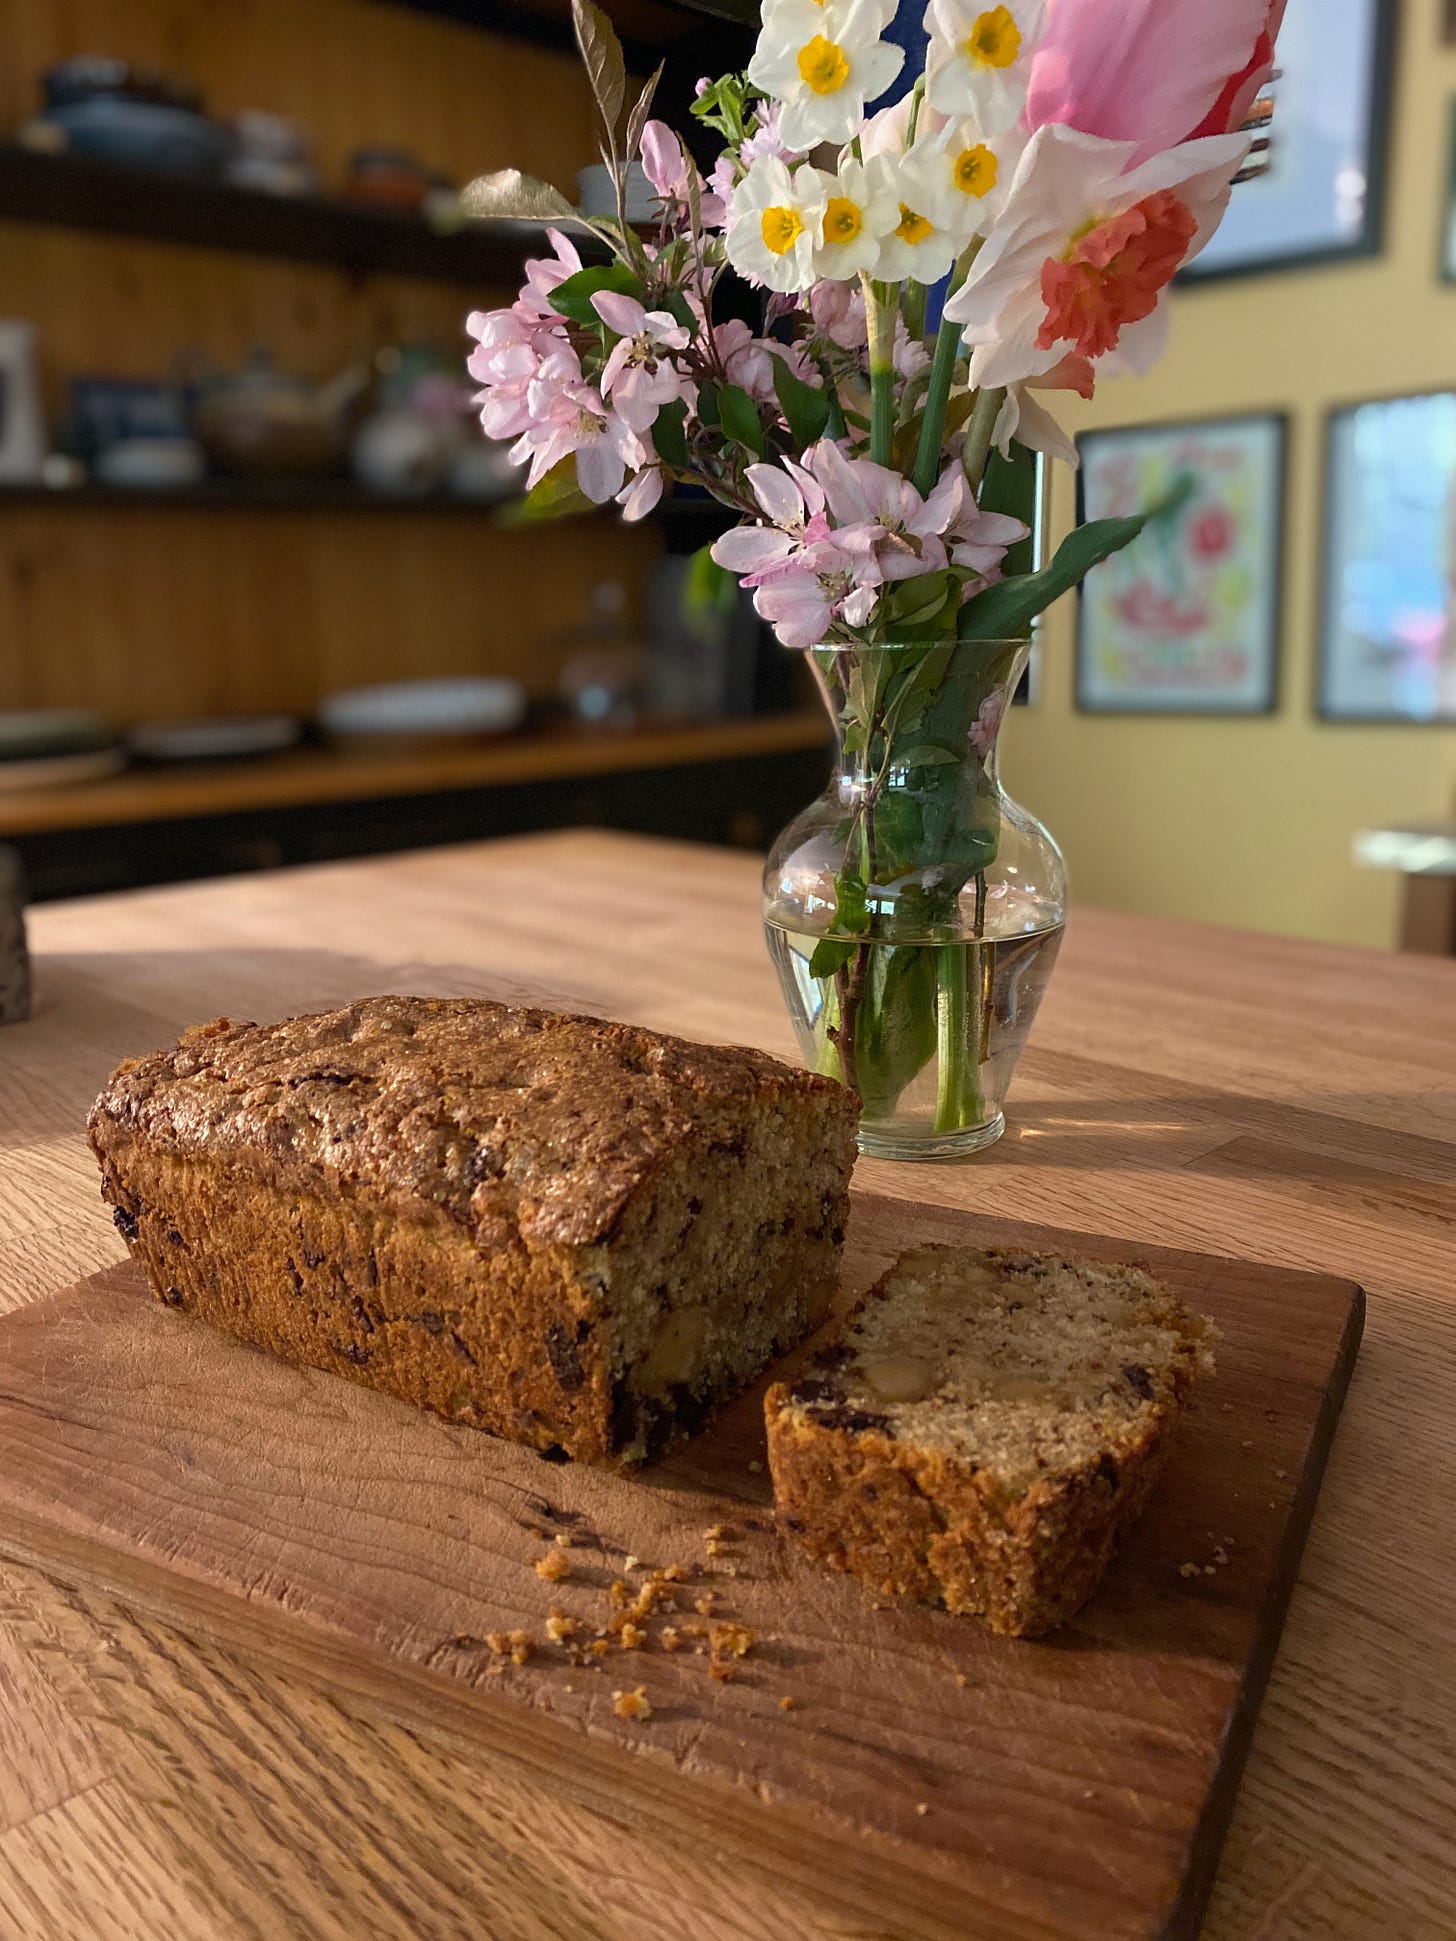 The scone loaf, with one slice cut off, sits on a wooden cutting board. A vase of spring tulips and daffodils sits behind it. The kitchen island is dappled with light.